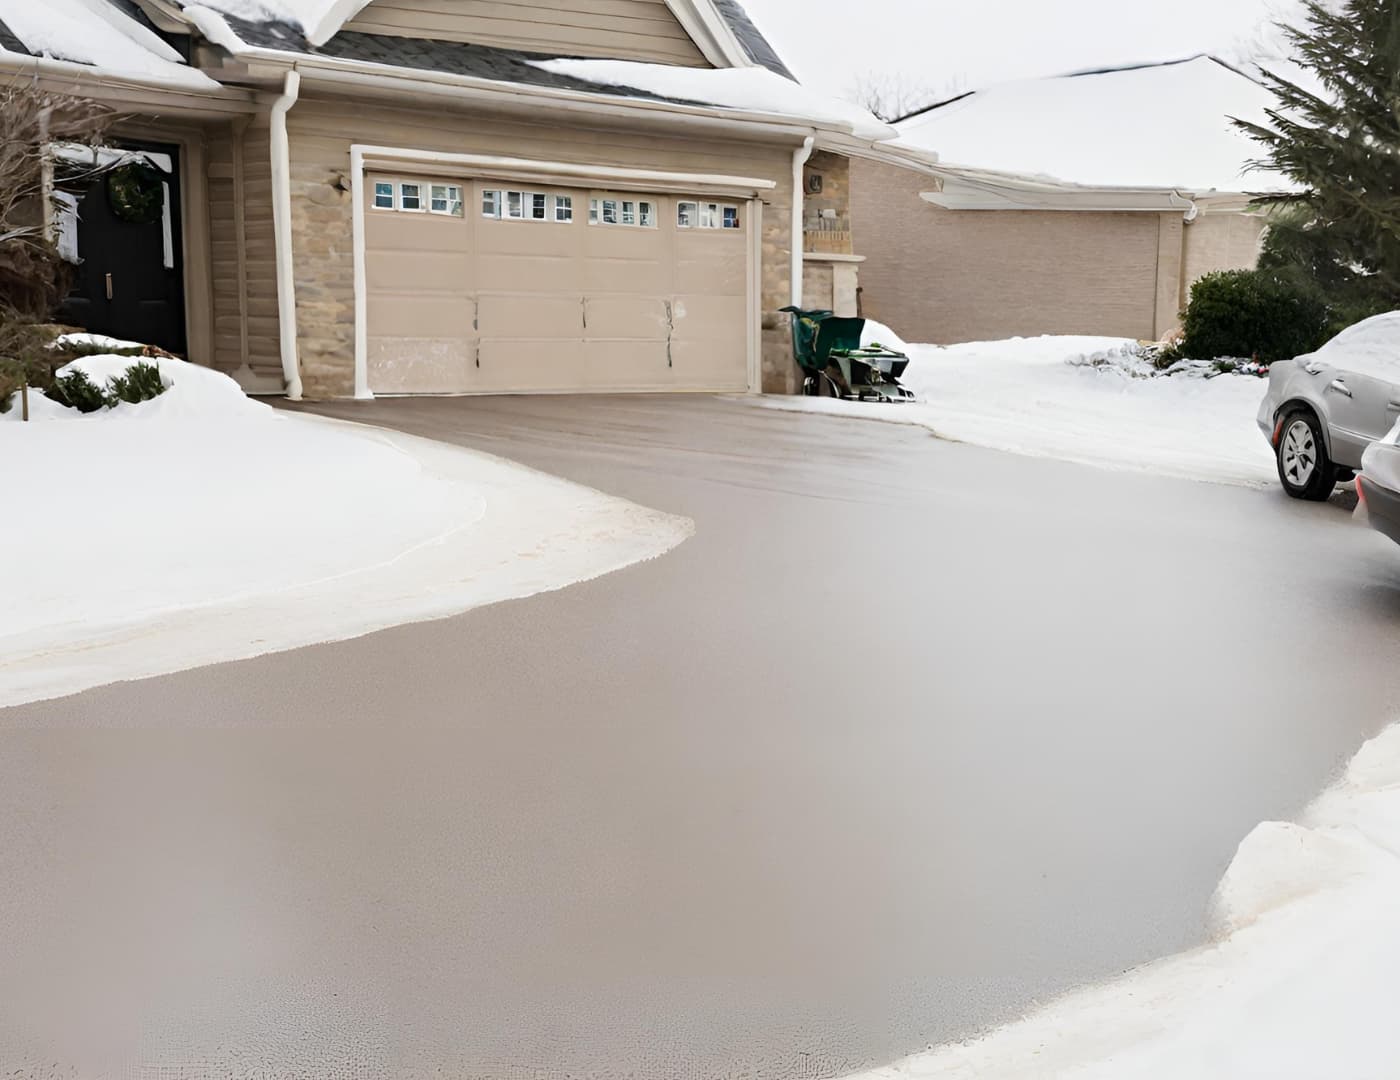 Driveway Sanding vs. Salting: Which Is the Better Winter Solution?